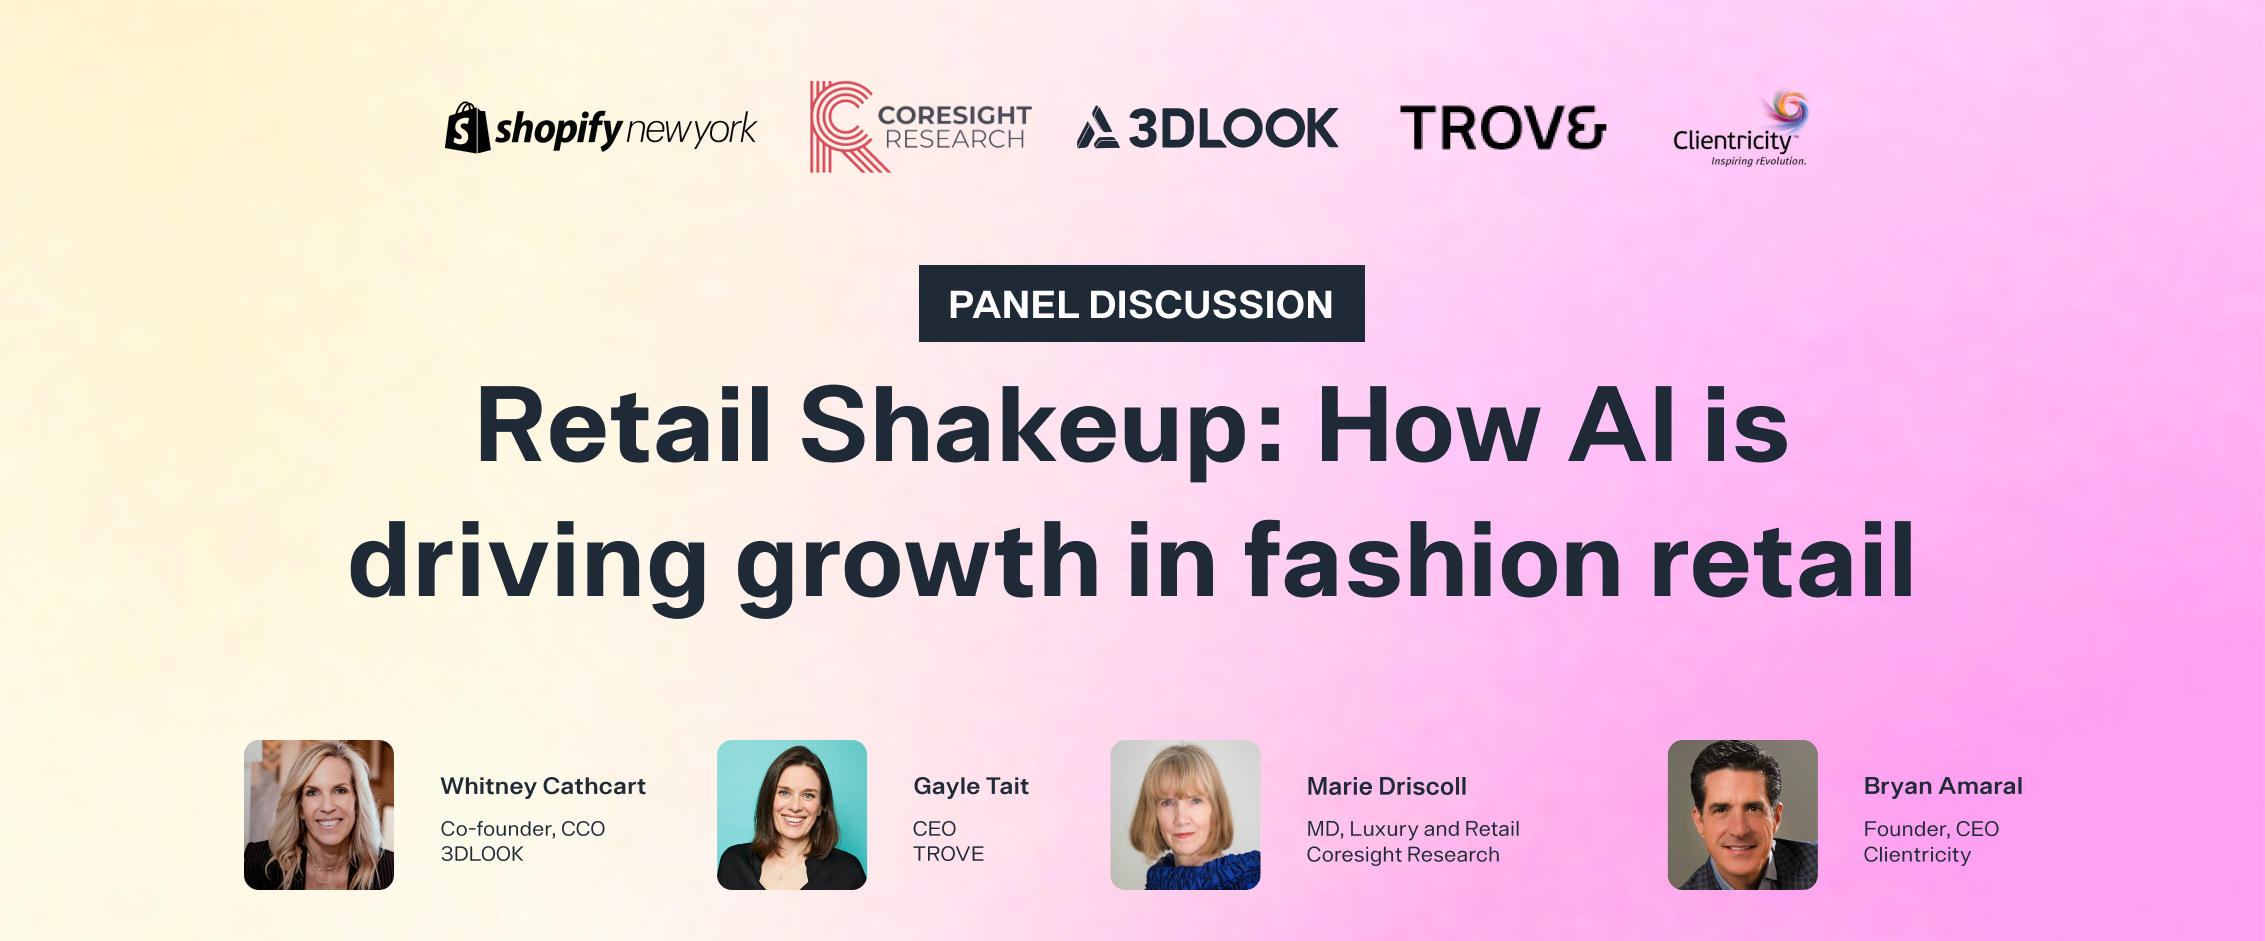 Retail Shakeup: How AI is driving growth in Fashion Retail